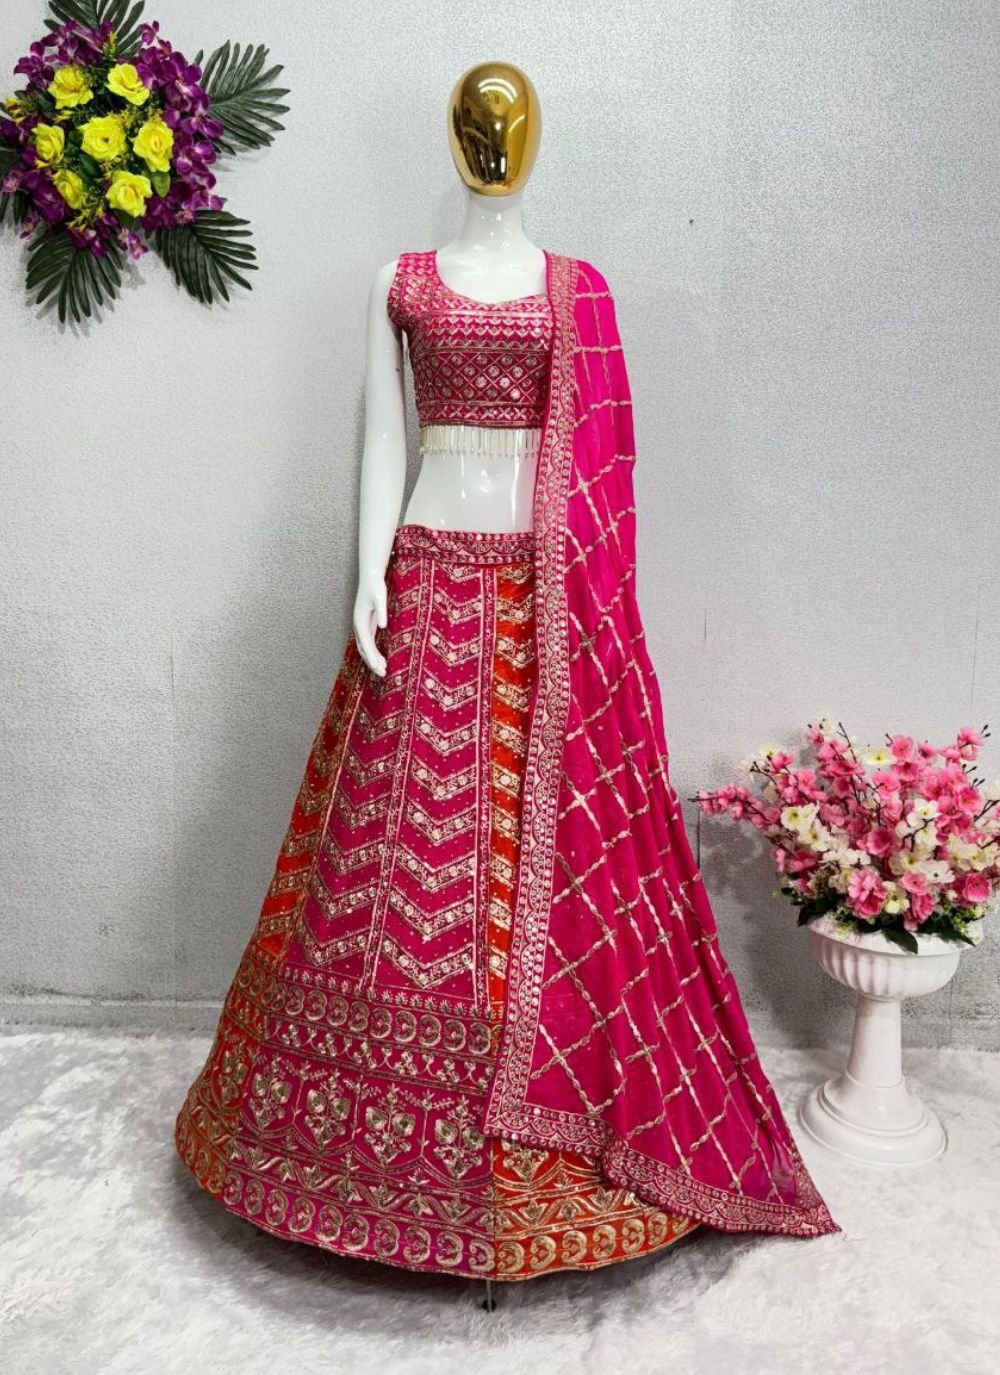 Gorgeous Pink Lehengas That We Recently potted On Real Brides!